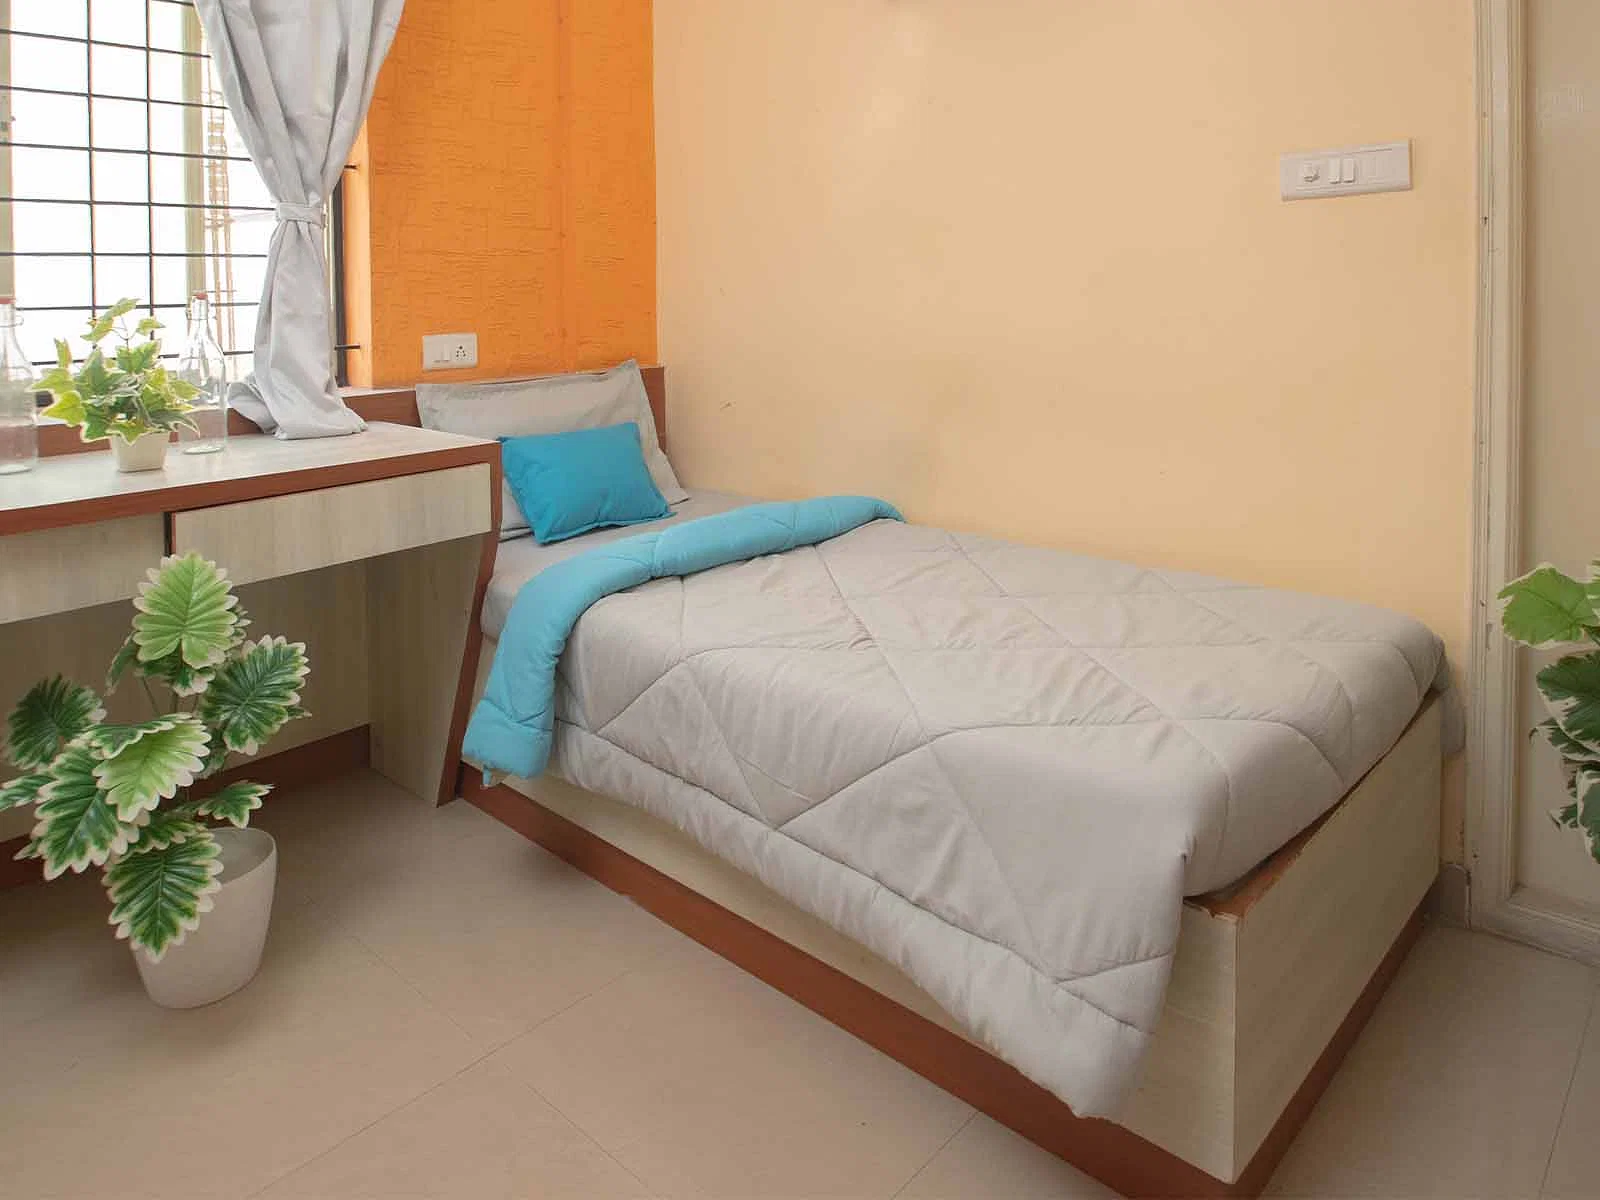 budget-friendly PGs and hostels for unisex with single rooms with daily hopusekeeping-Zolo Heaven C